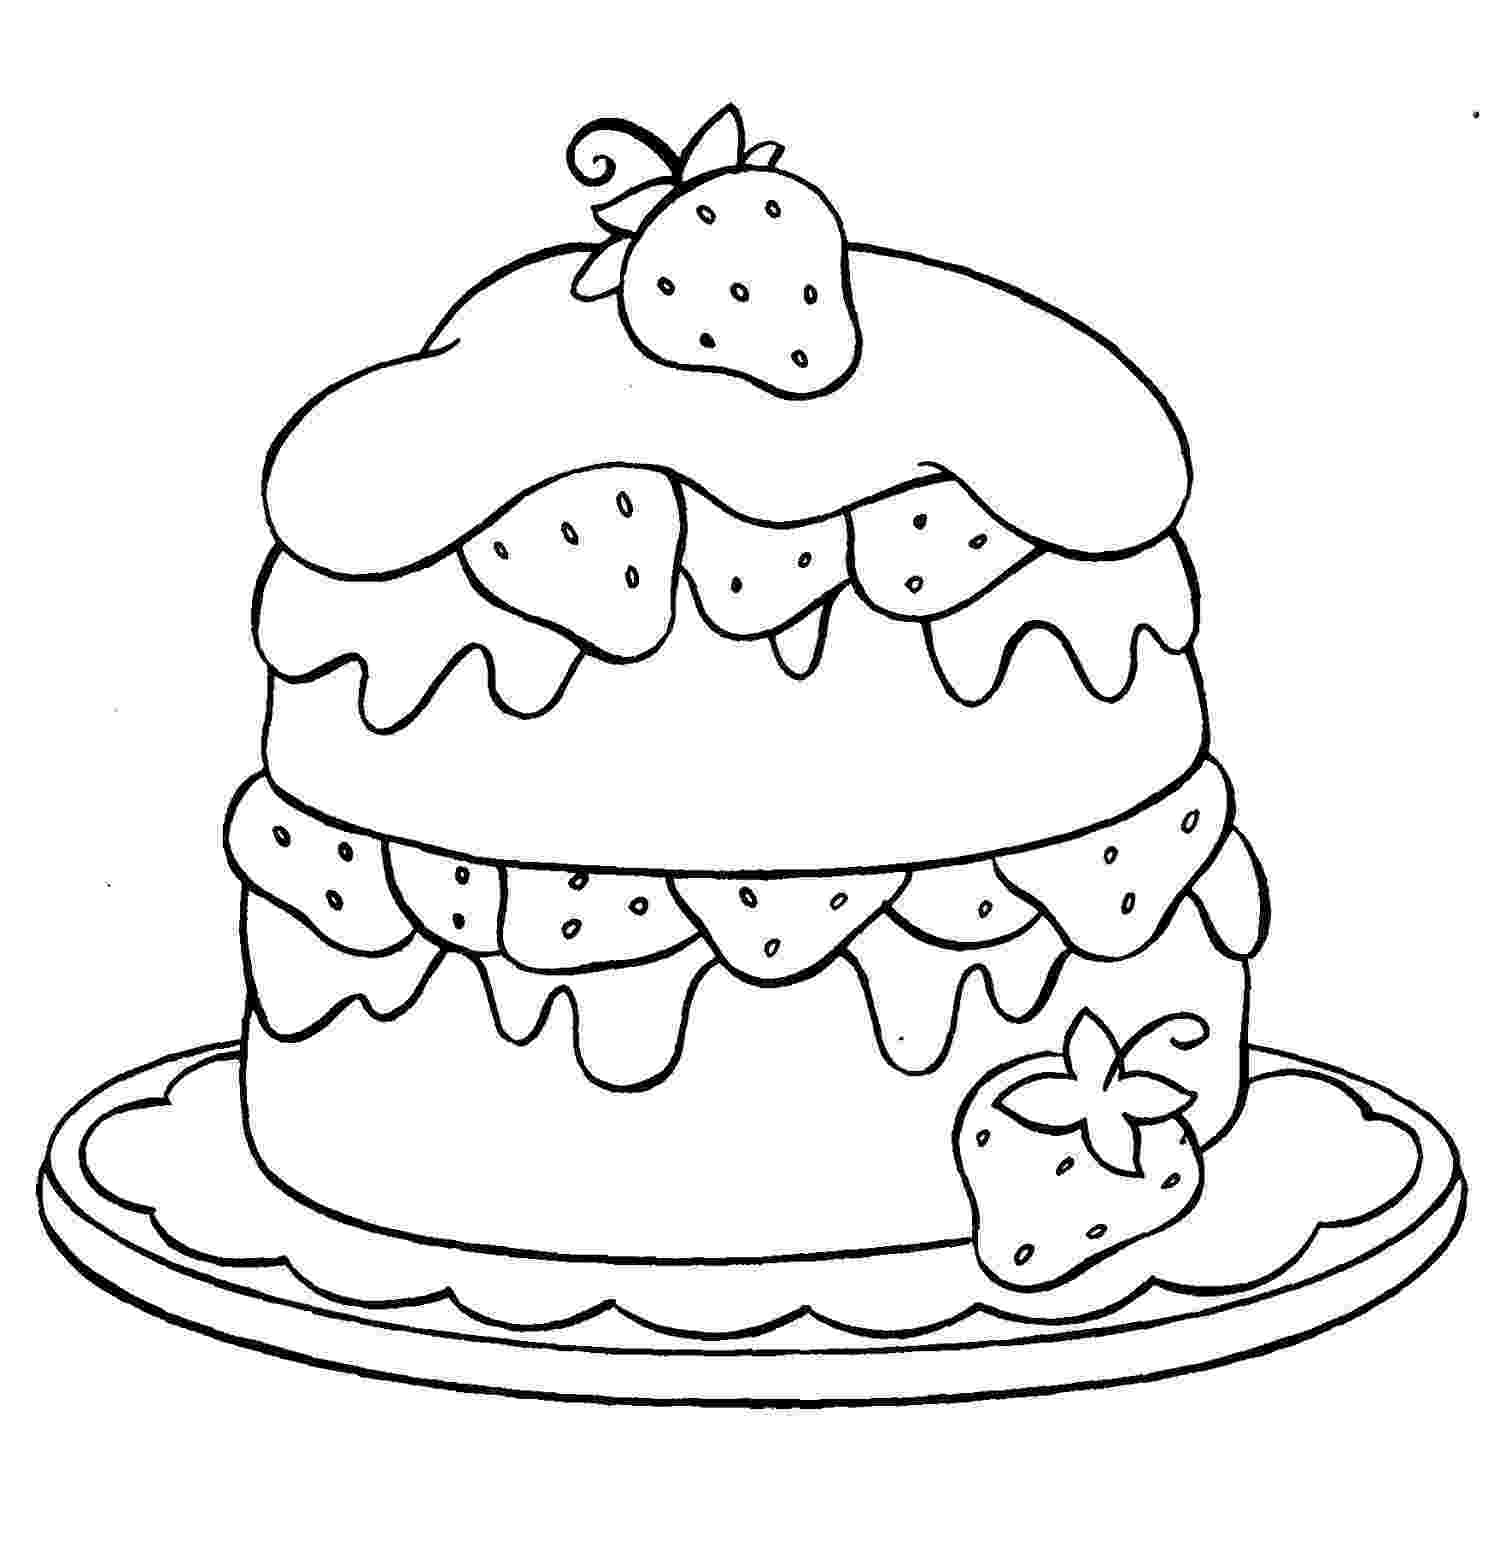 coloring pages cake free printable birthday cake coloring pages for kids pages cake coloring 1 1